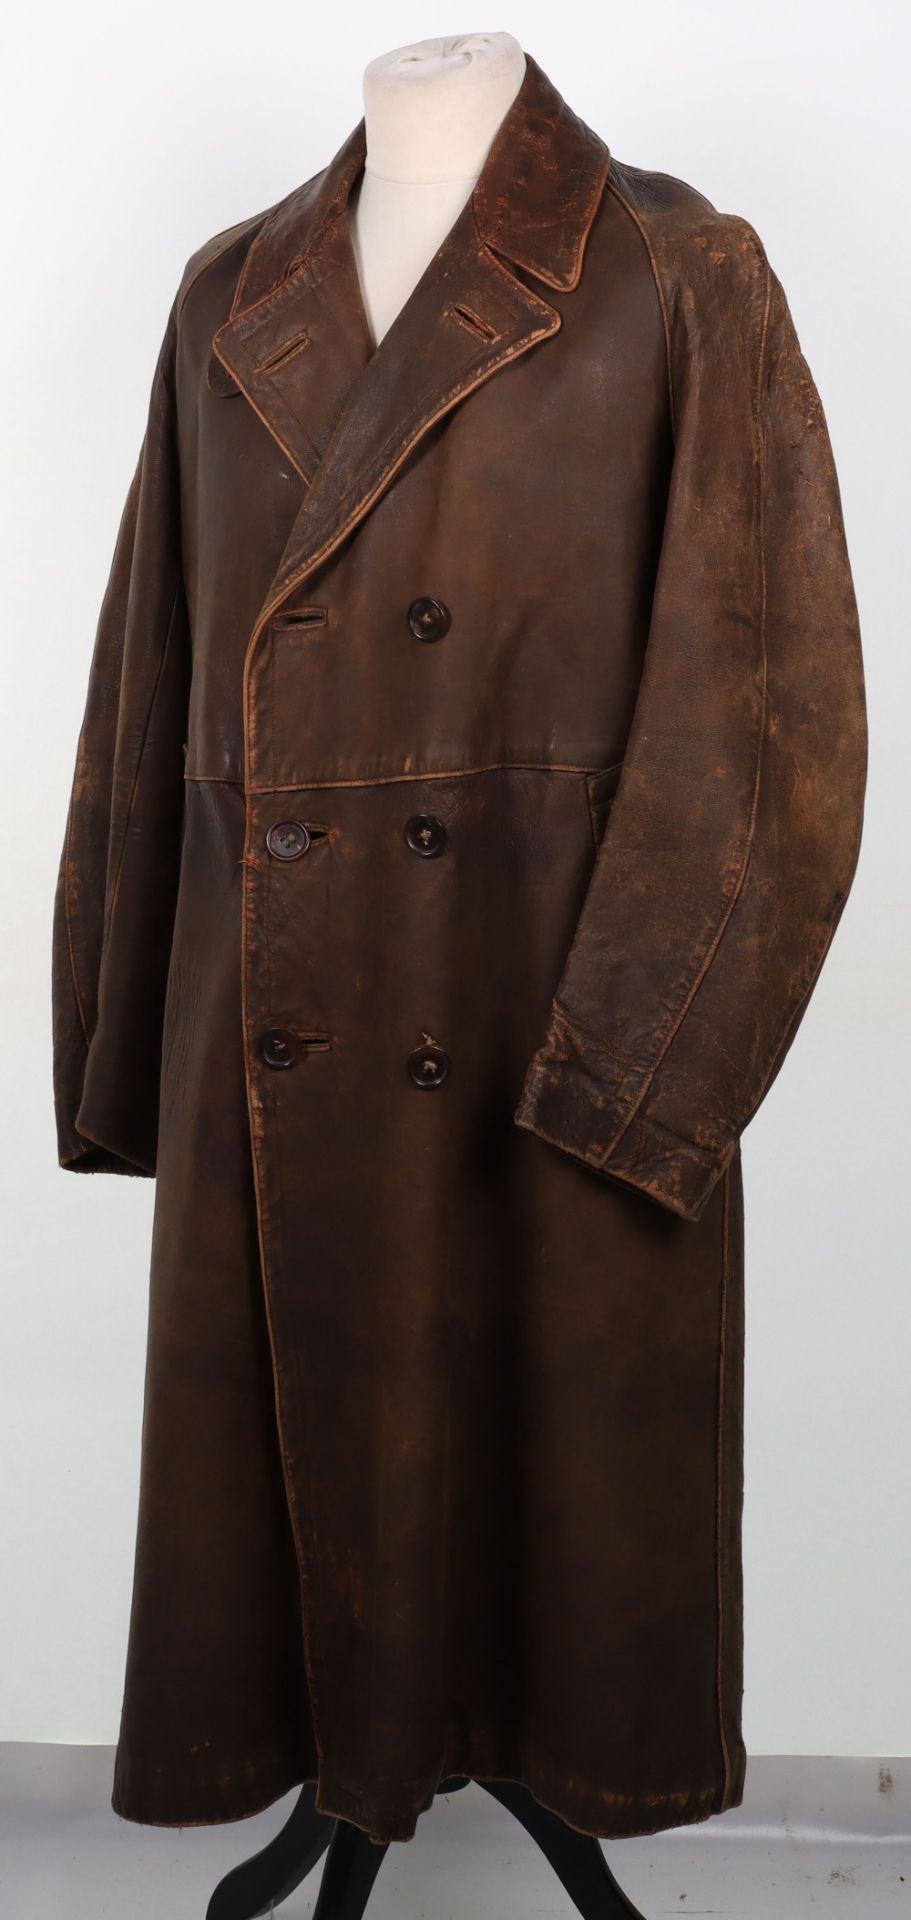 Early 20th Century Leather Aviators / Motoring Coat - Image 6 of 9